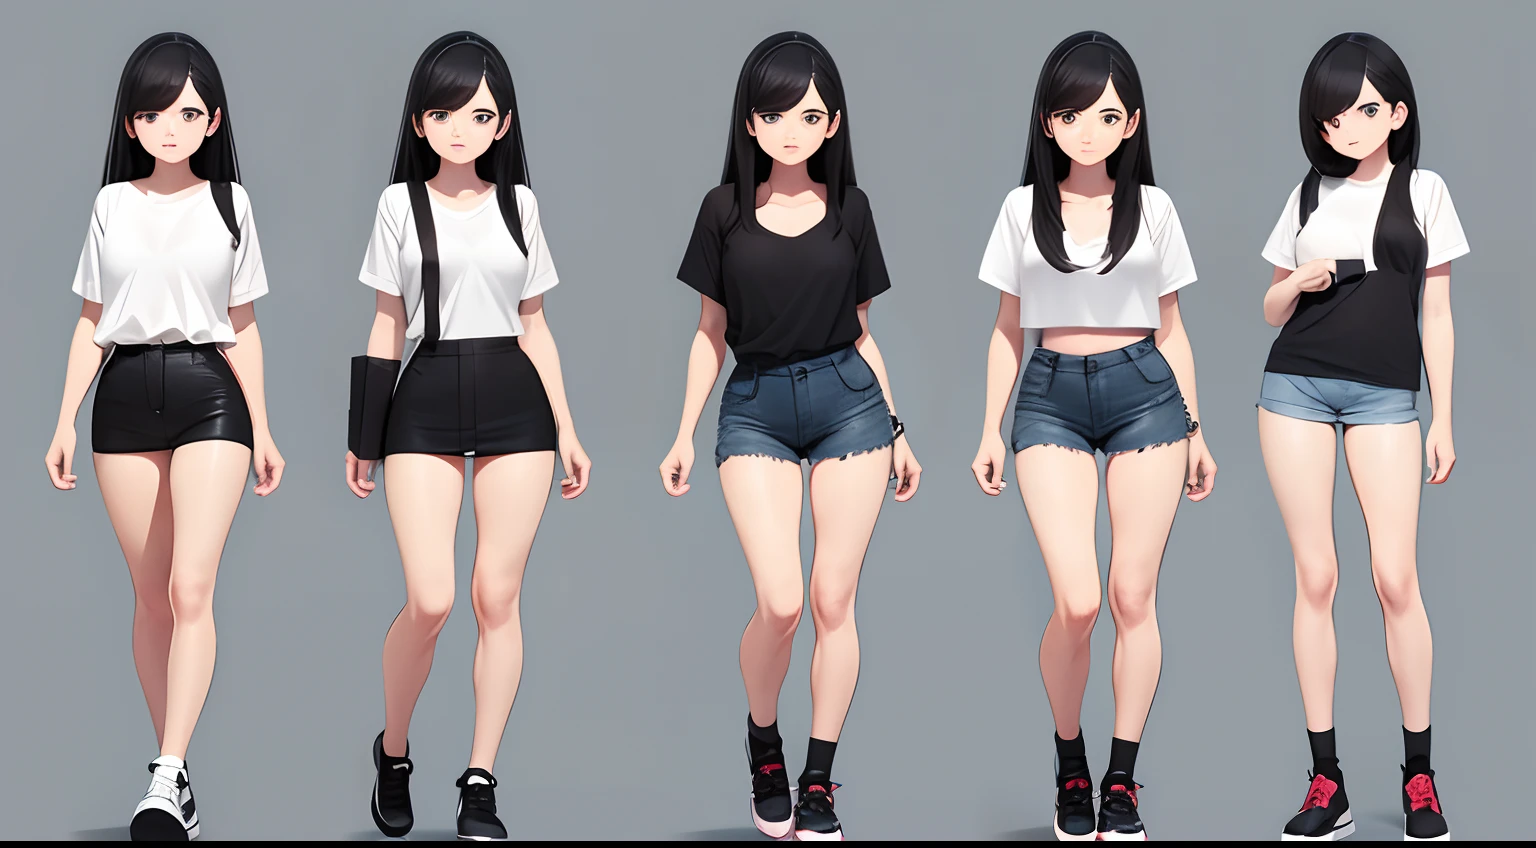 create a female character model, with long black hair, a white shirt, short shorts and shoes, manga style